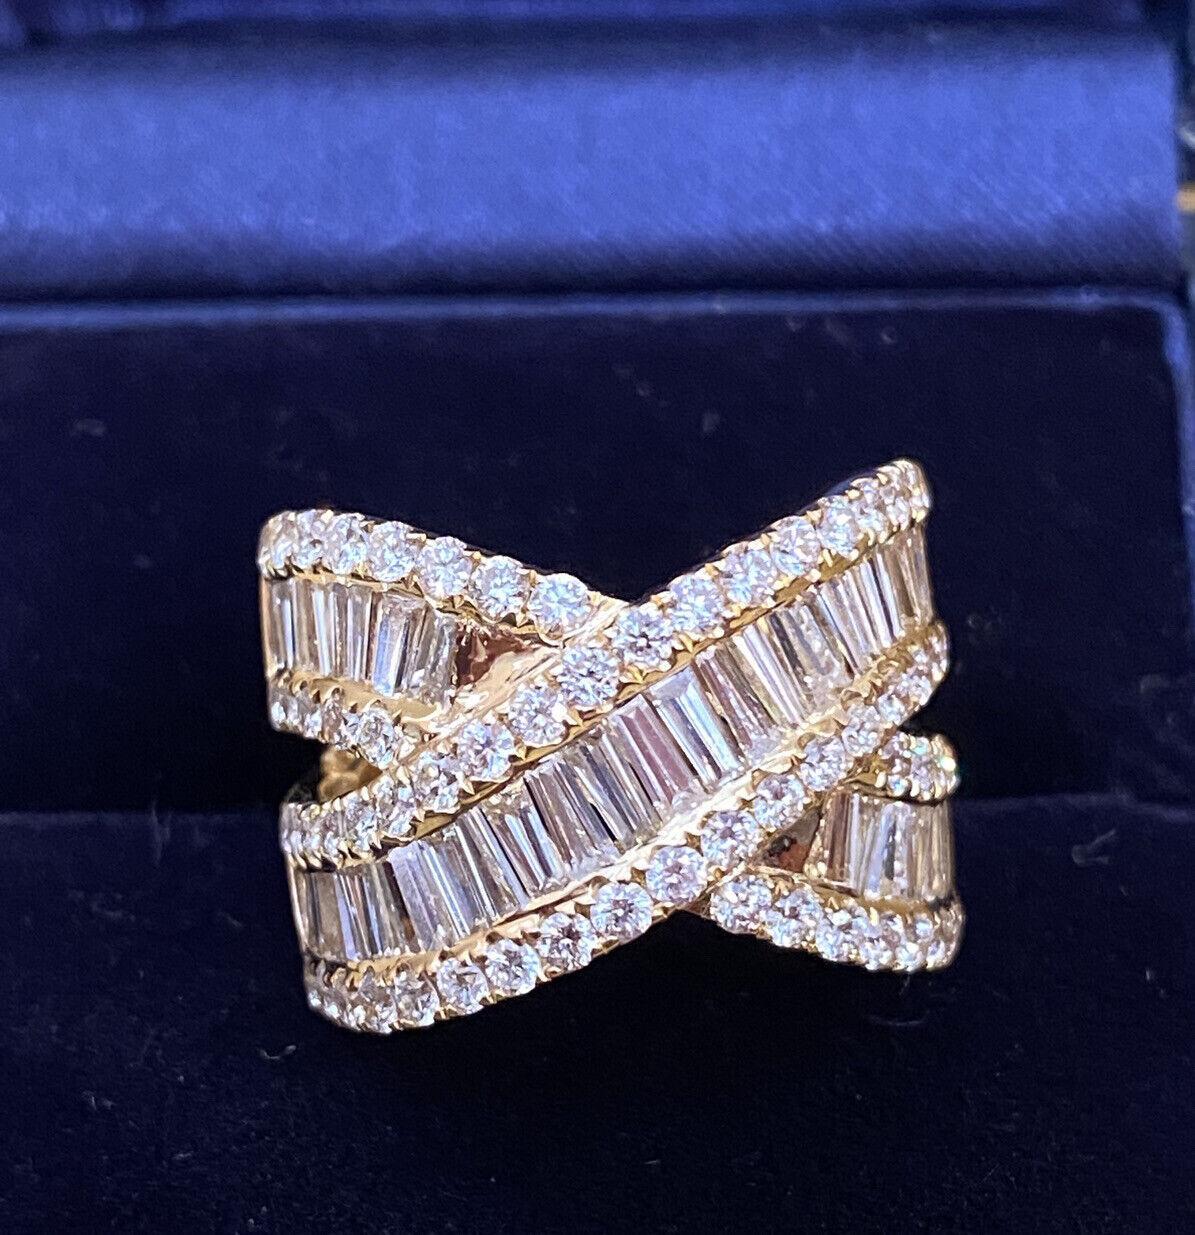 Wide Diamond Crossover Ring 3.48 Carat Total Weight in 18k Yellow Gold In Excellent Condition For Sale In La Jolla, CA